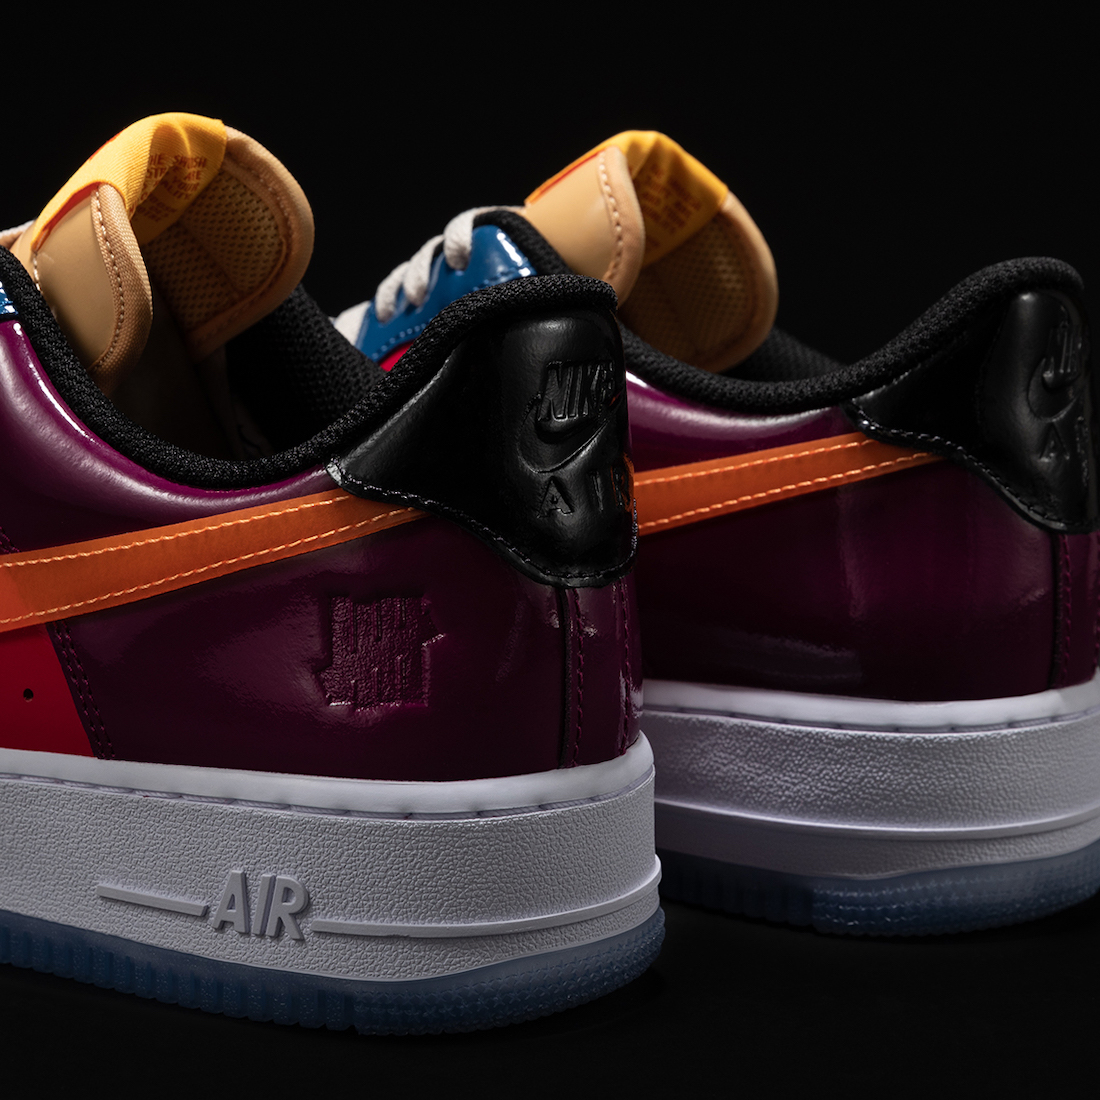 Undefeated Nike Air Force 1 Patent Total Orange DV5255-400 Release Date Heels